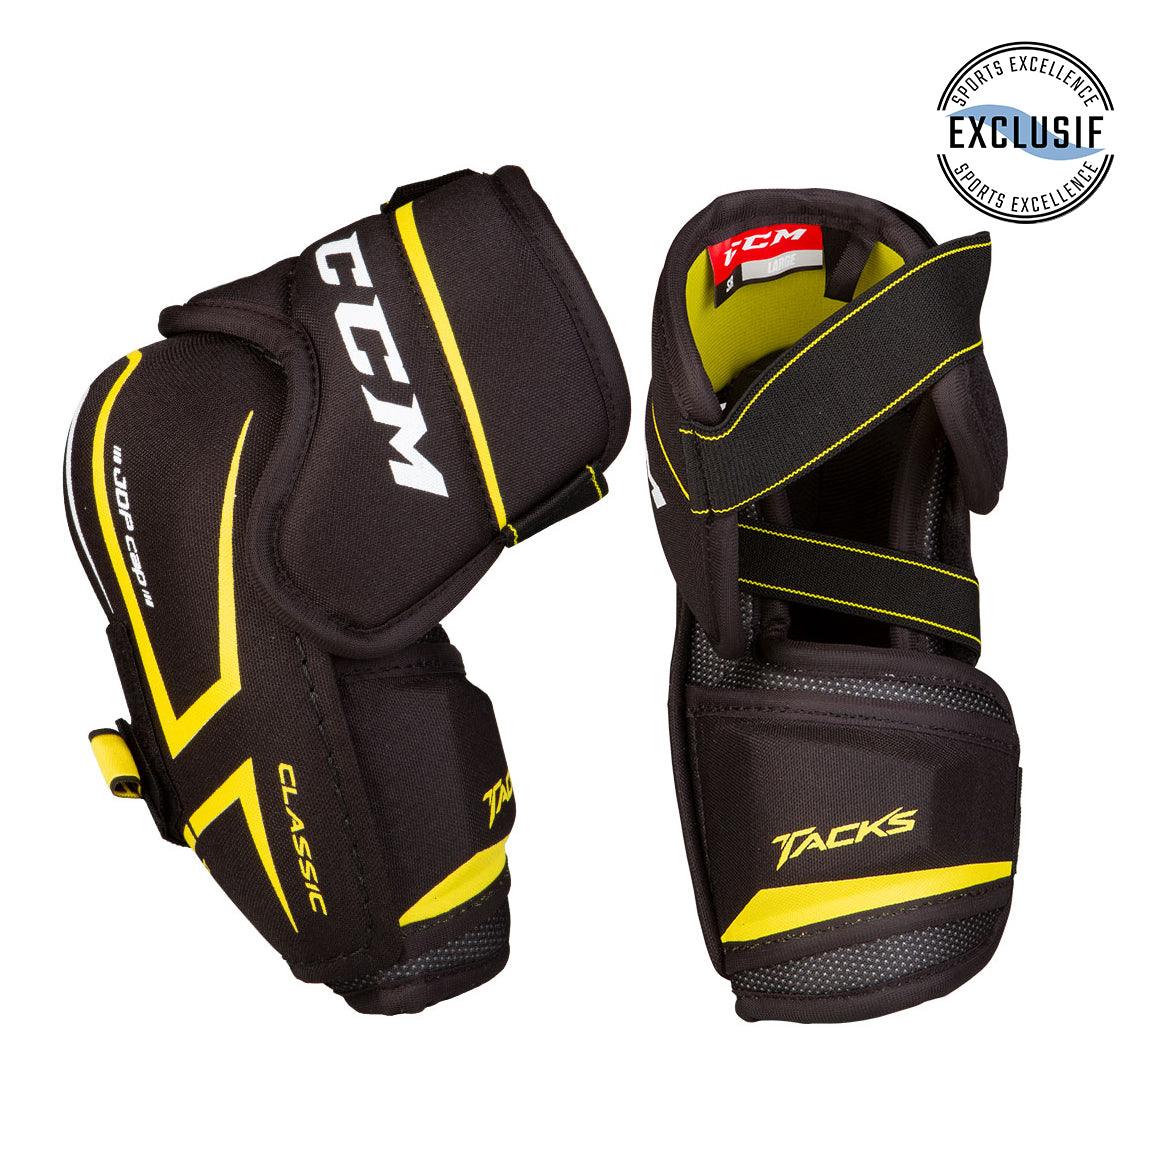 Junior Tacks Classic Elbow Pads by CCM